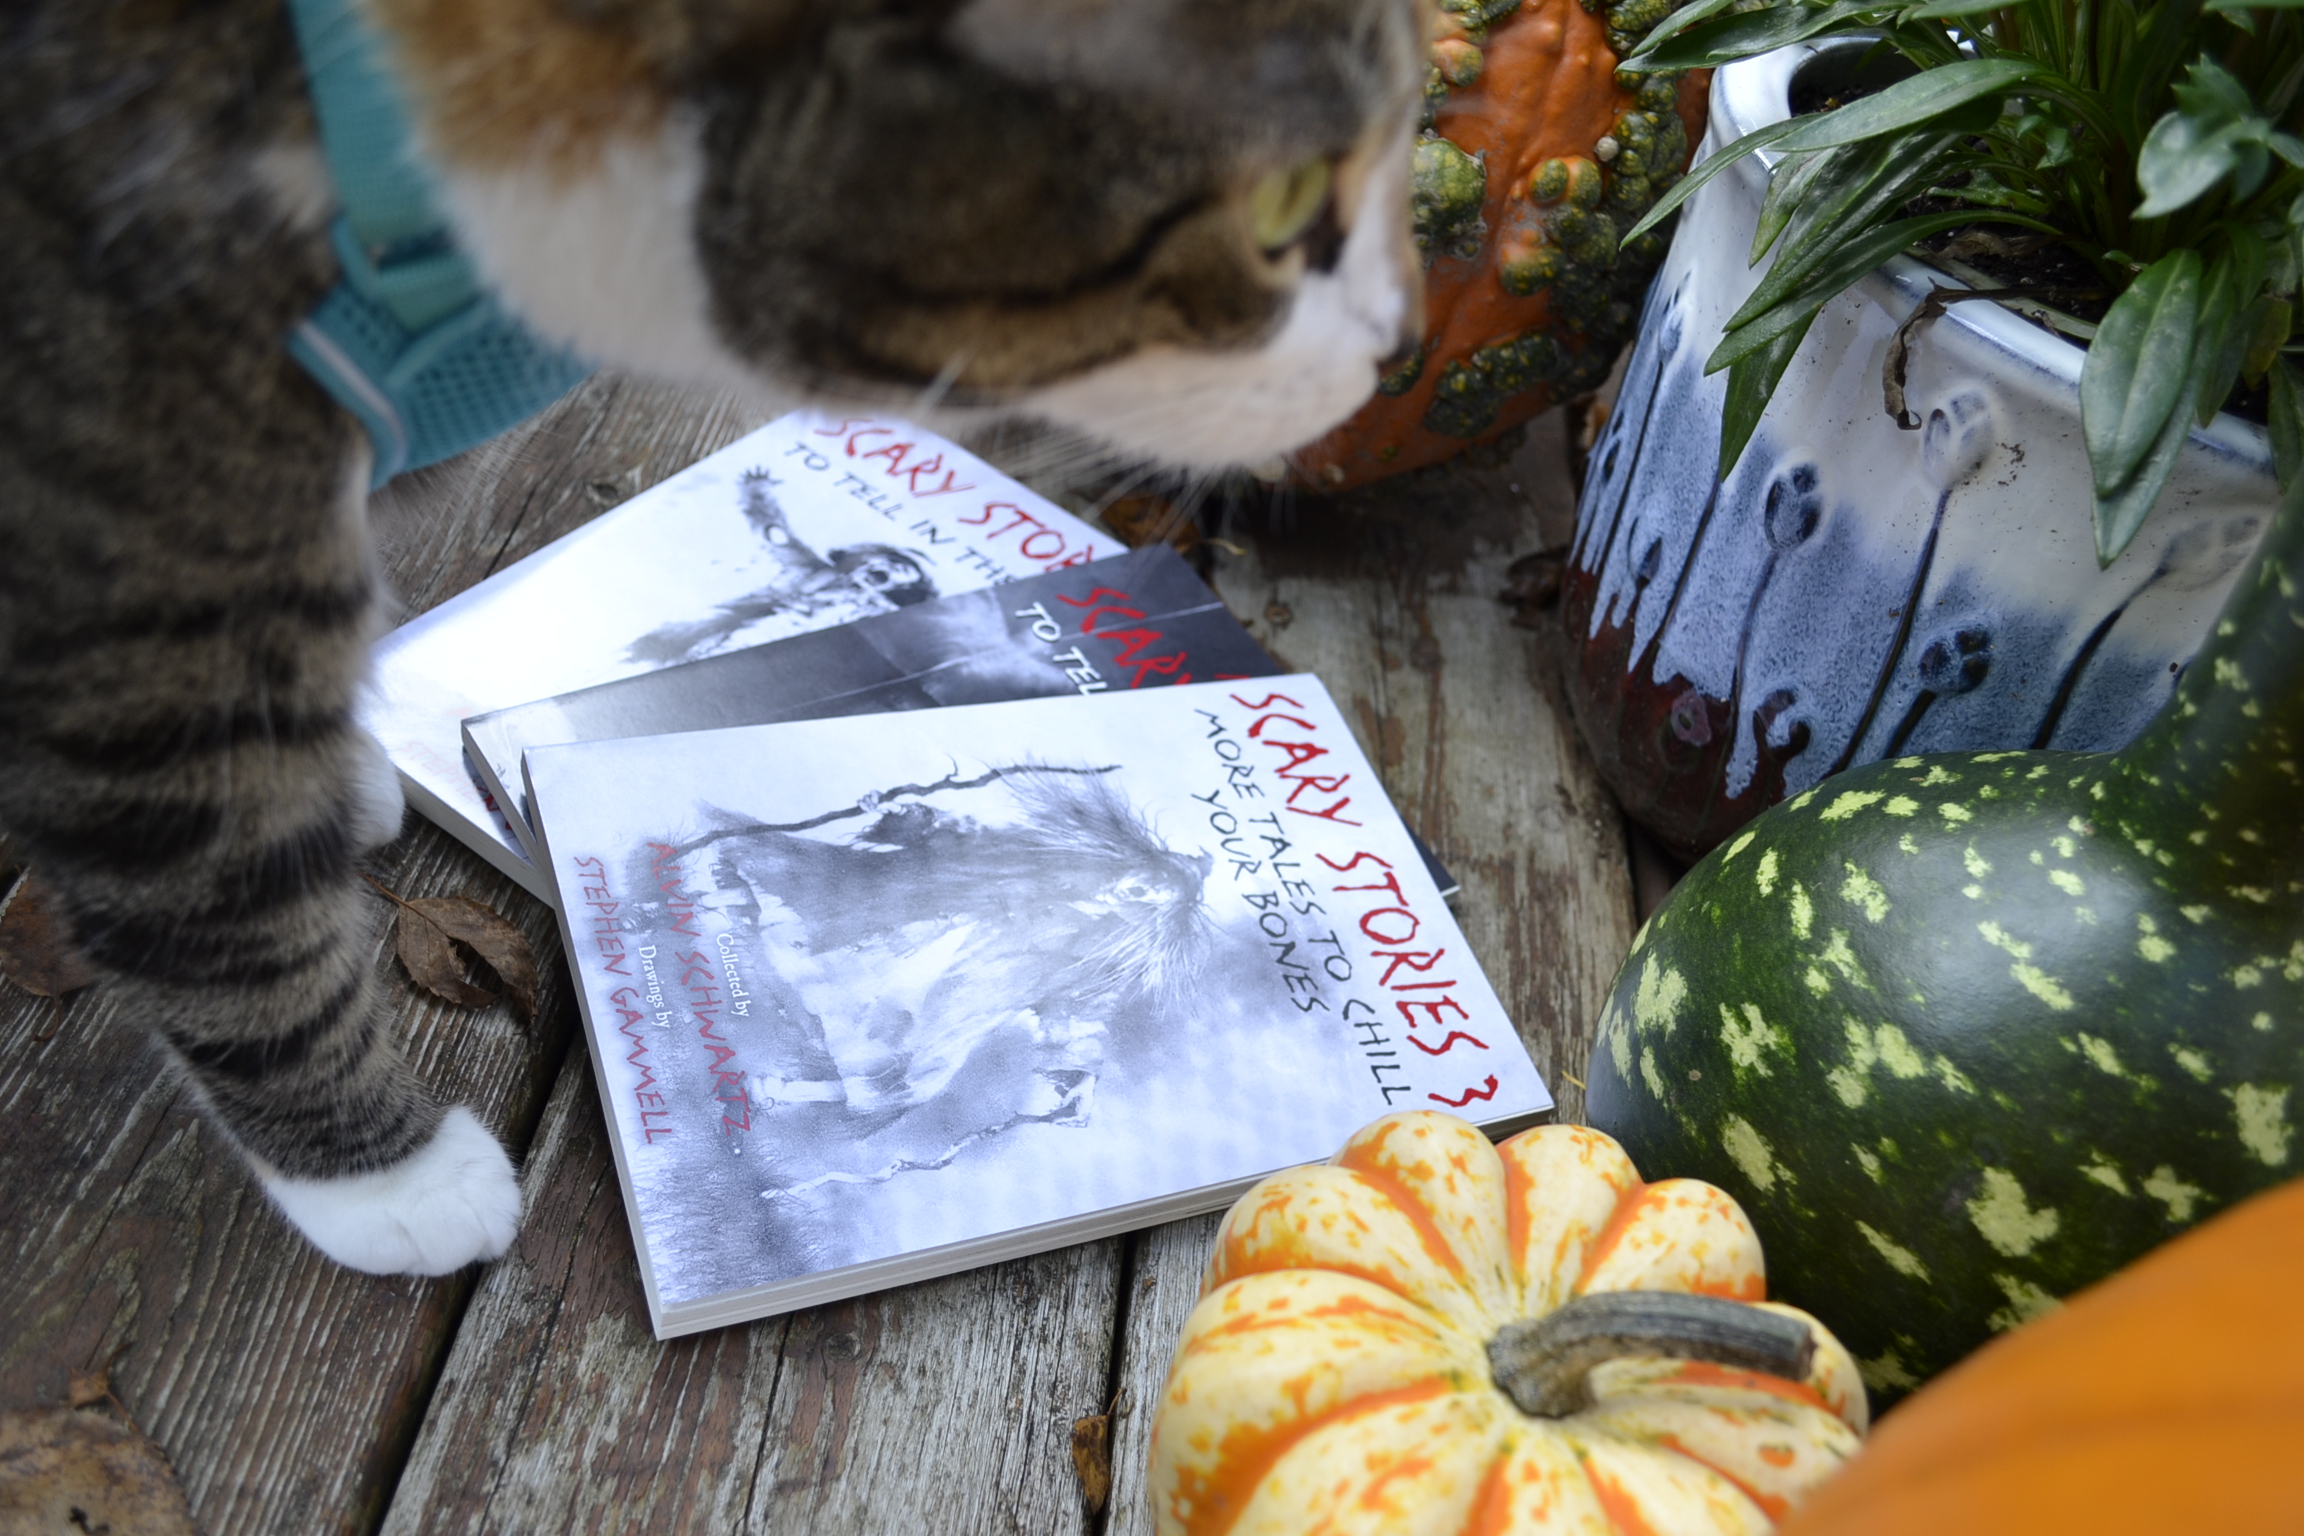 Three books with frightening and rough illustrations are spread out beneath a calico tabby's paws.